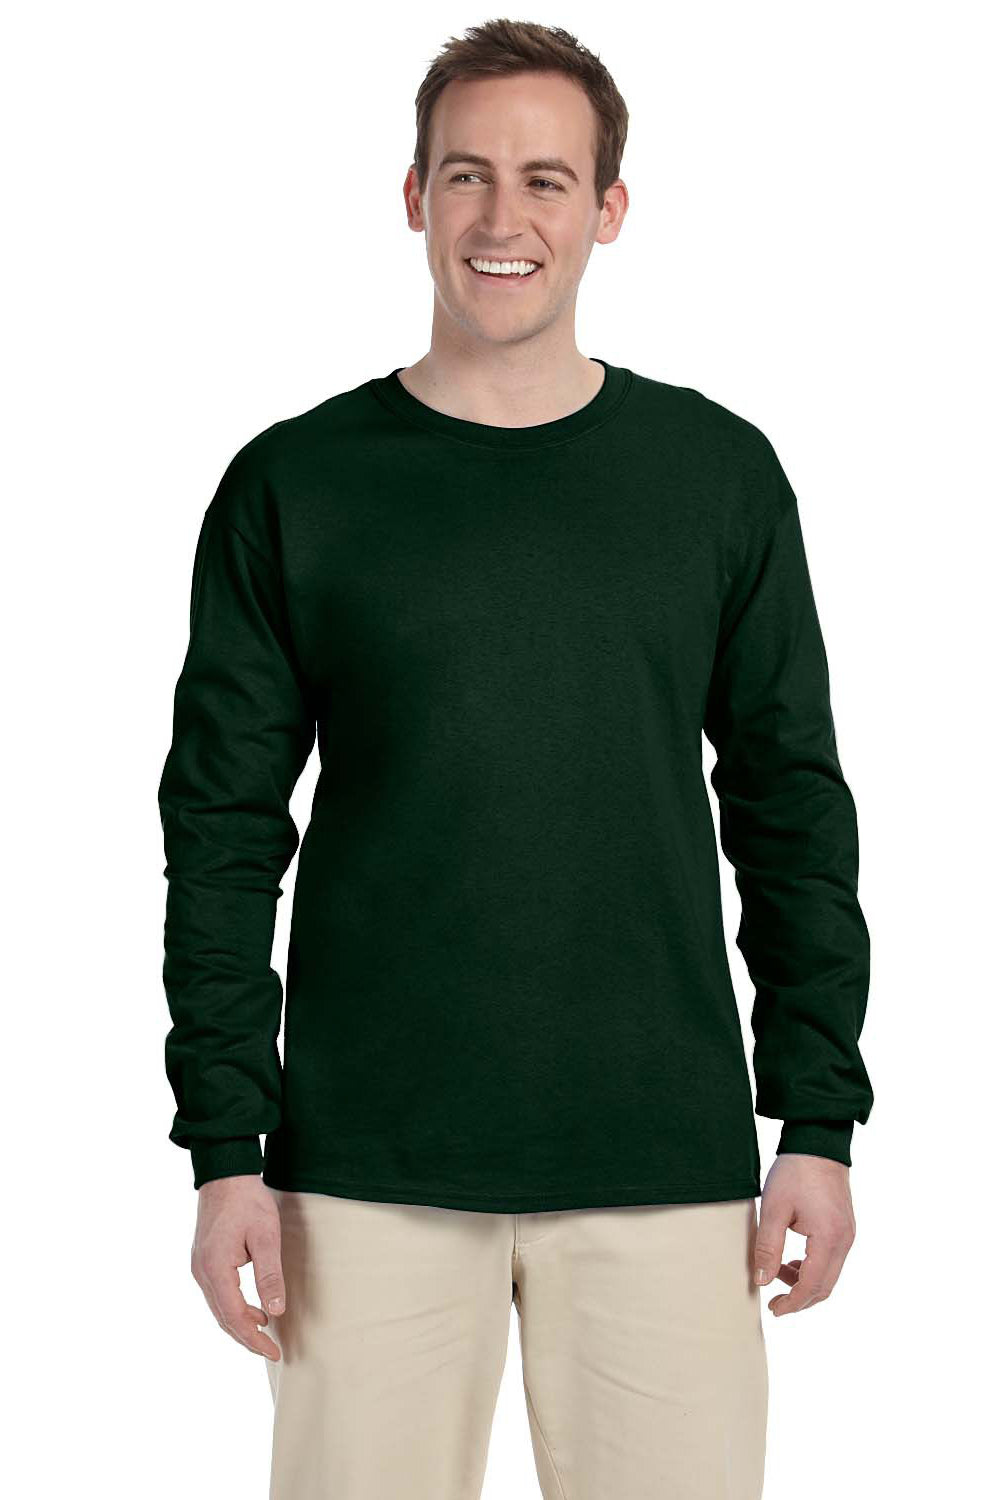 Fruit Of The Loom 4930 Mens HD Jersey Long Sleeve Crewneck T-Shirt Forest Green Front